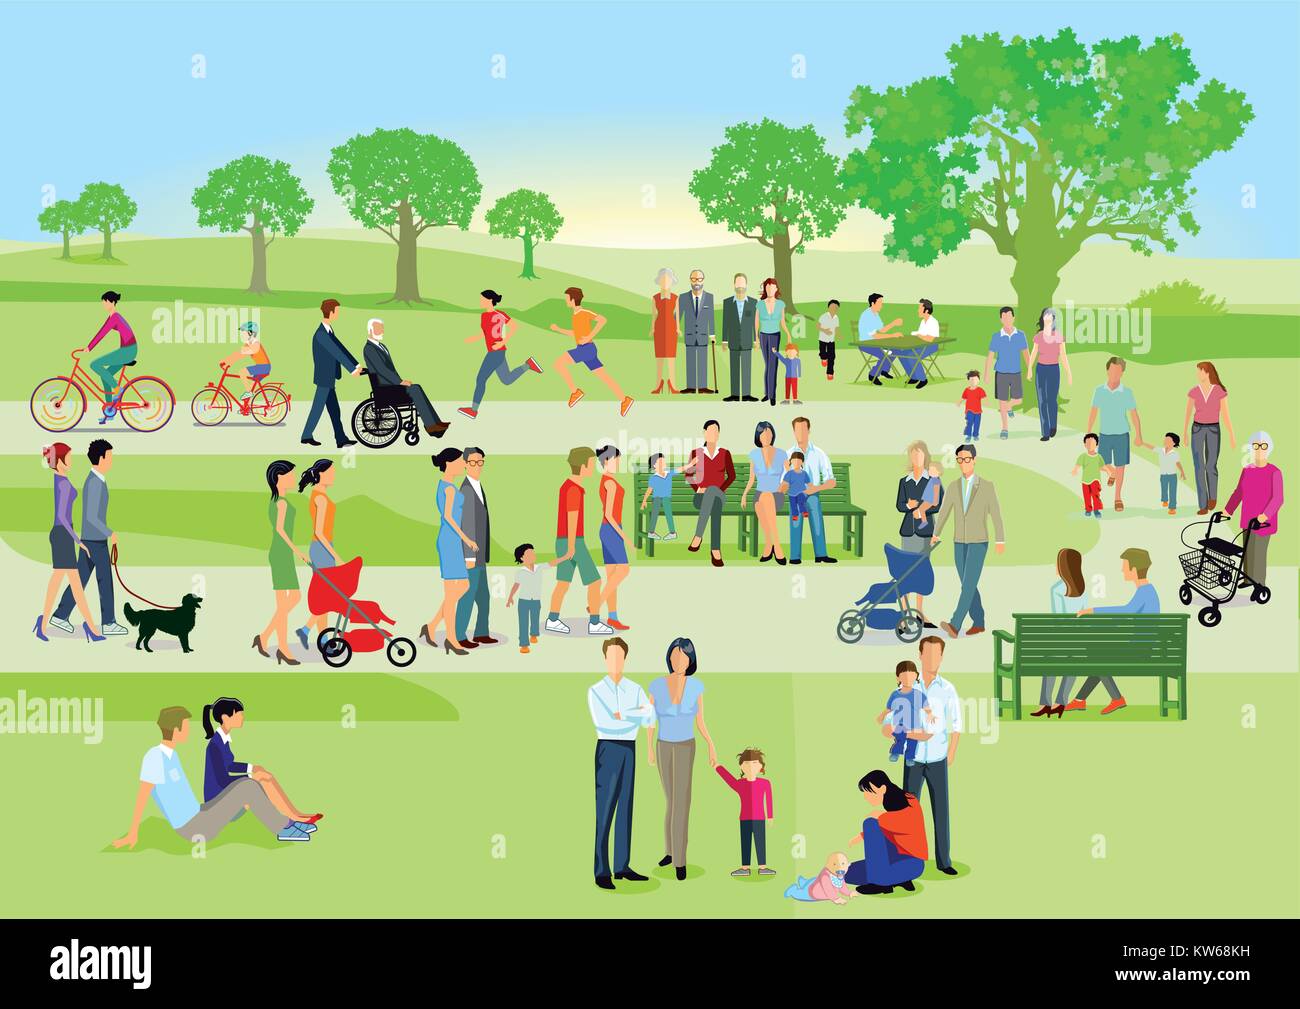 Families and people are relaxing in the park, illustration Stock Vector